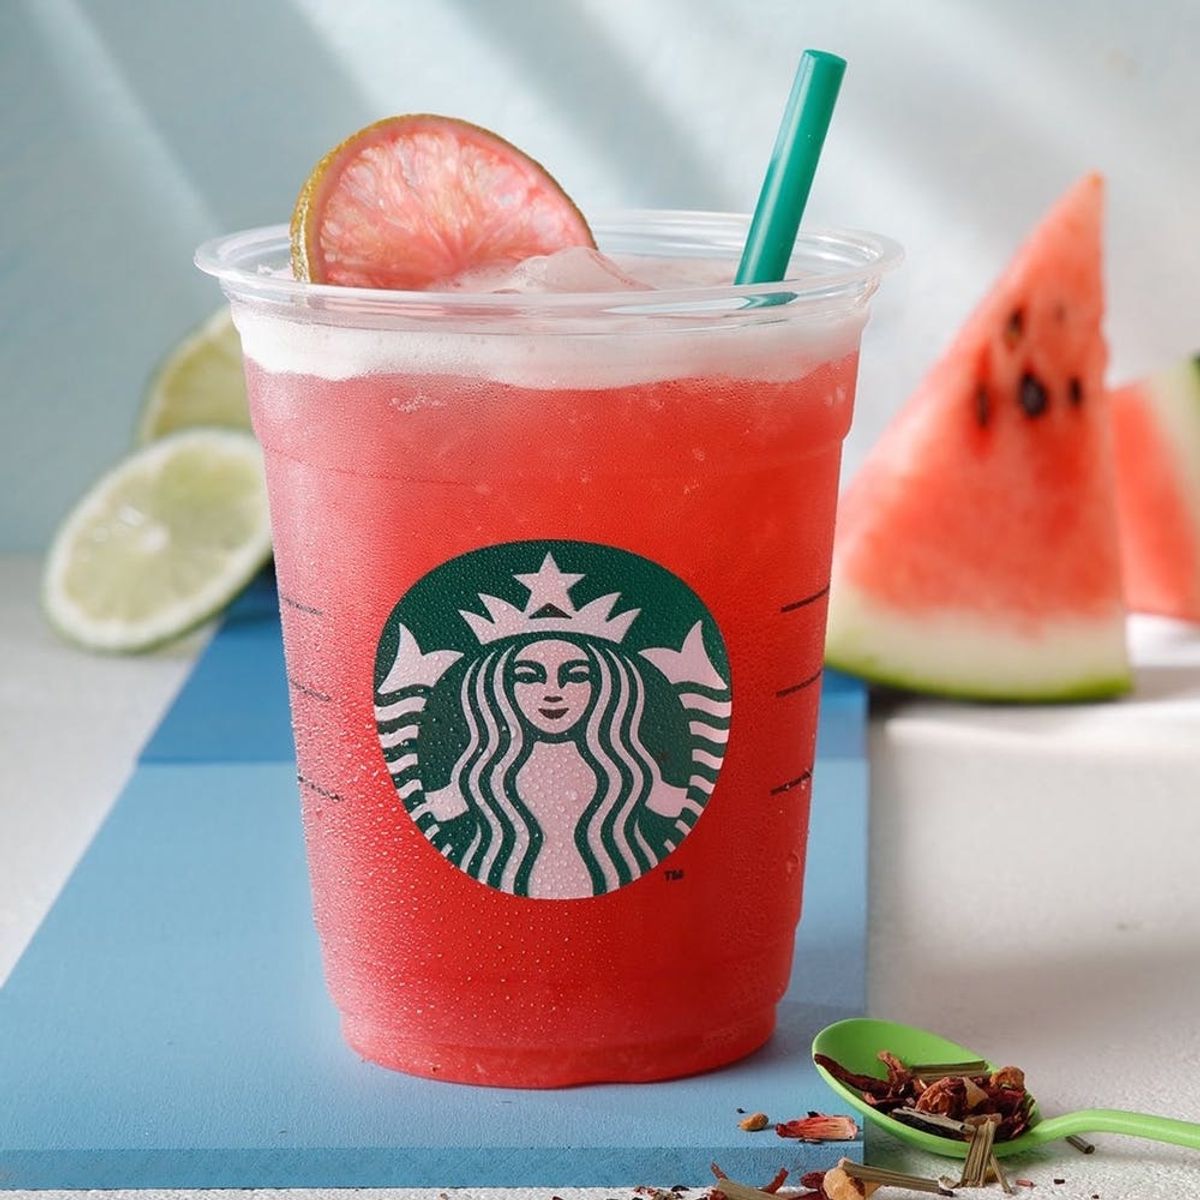 Starbucks Launched a New Watermelon Concoction That Has Us Practically Drooling